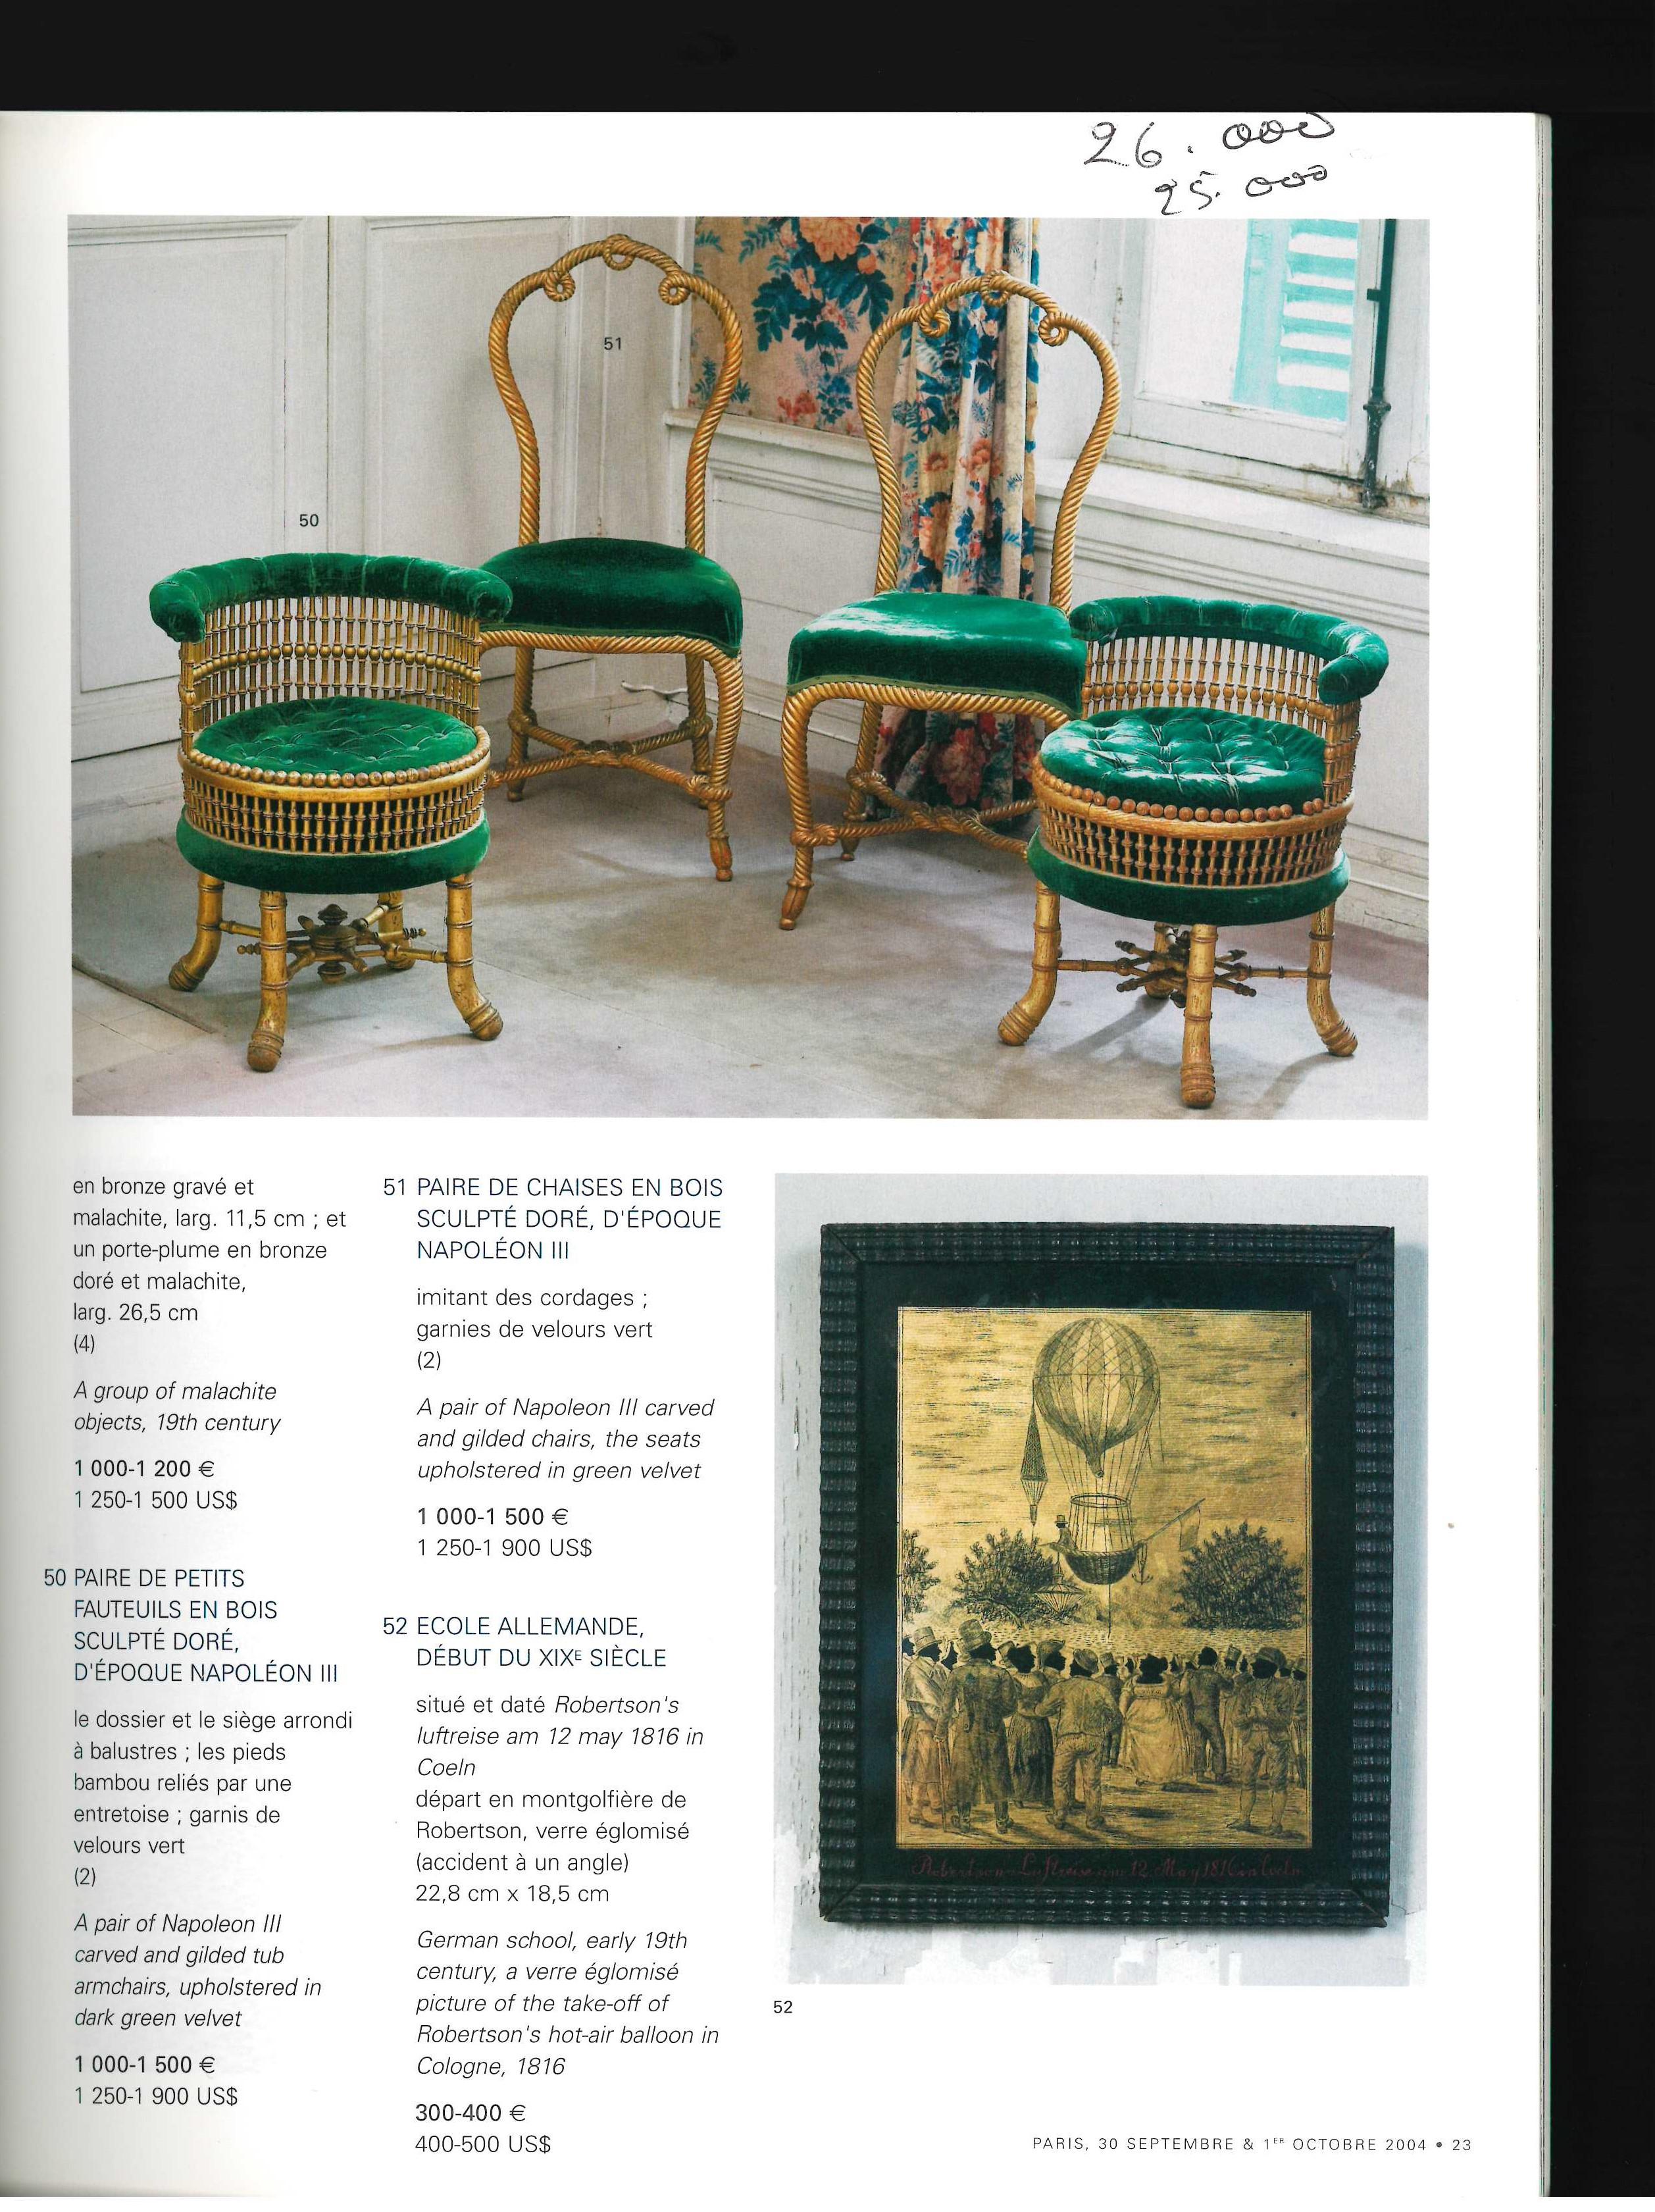 This is the sale catalogue produced by Sotheby's in 2004, for sale of the property of Madeleine Castaing, primarily the contents of the house in Leves, not far from Chartres. In her early years she was a budding actress who then found her vocation